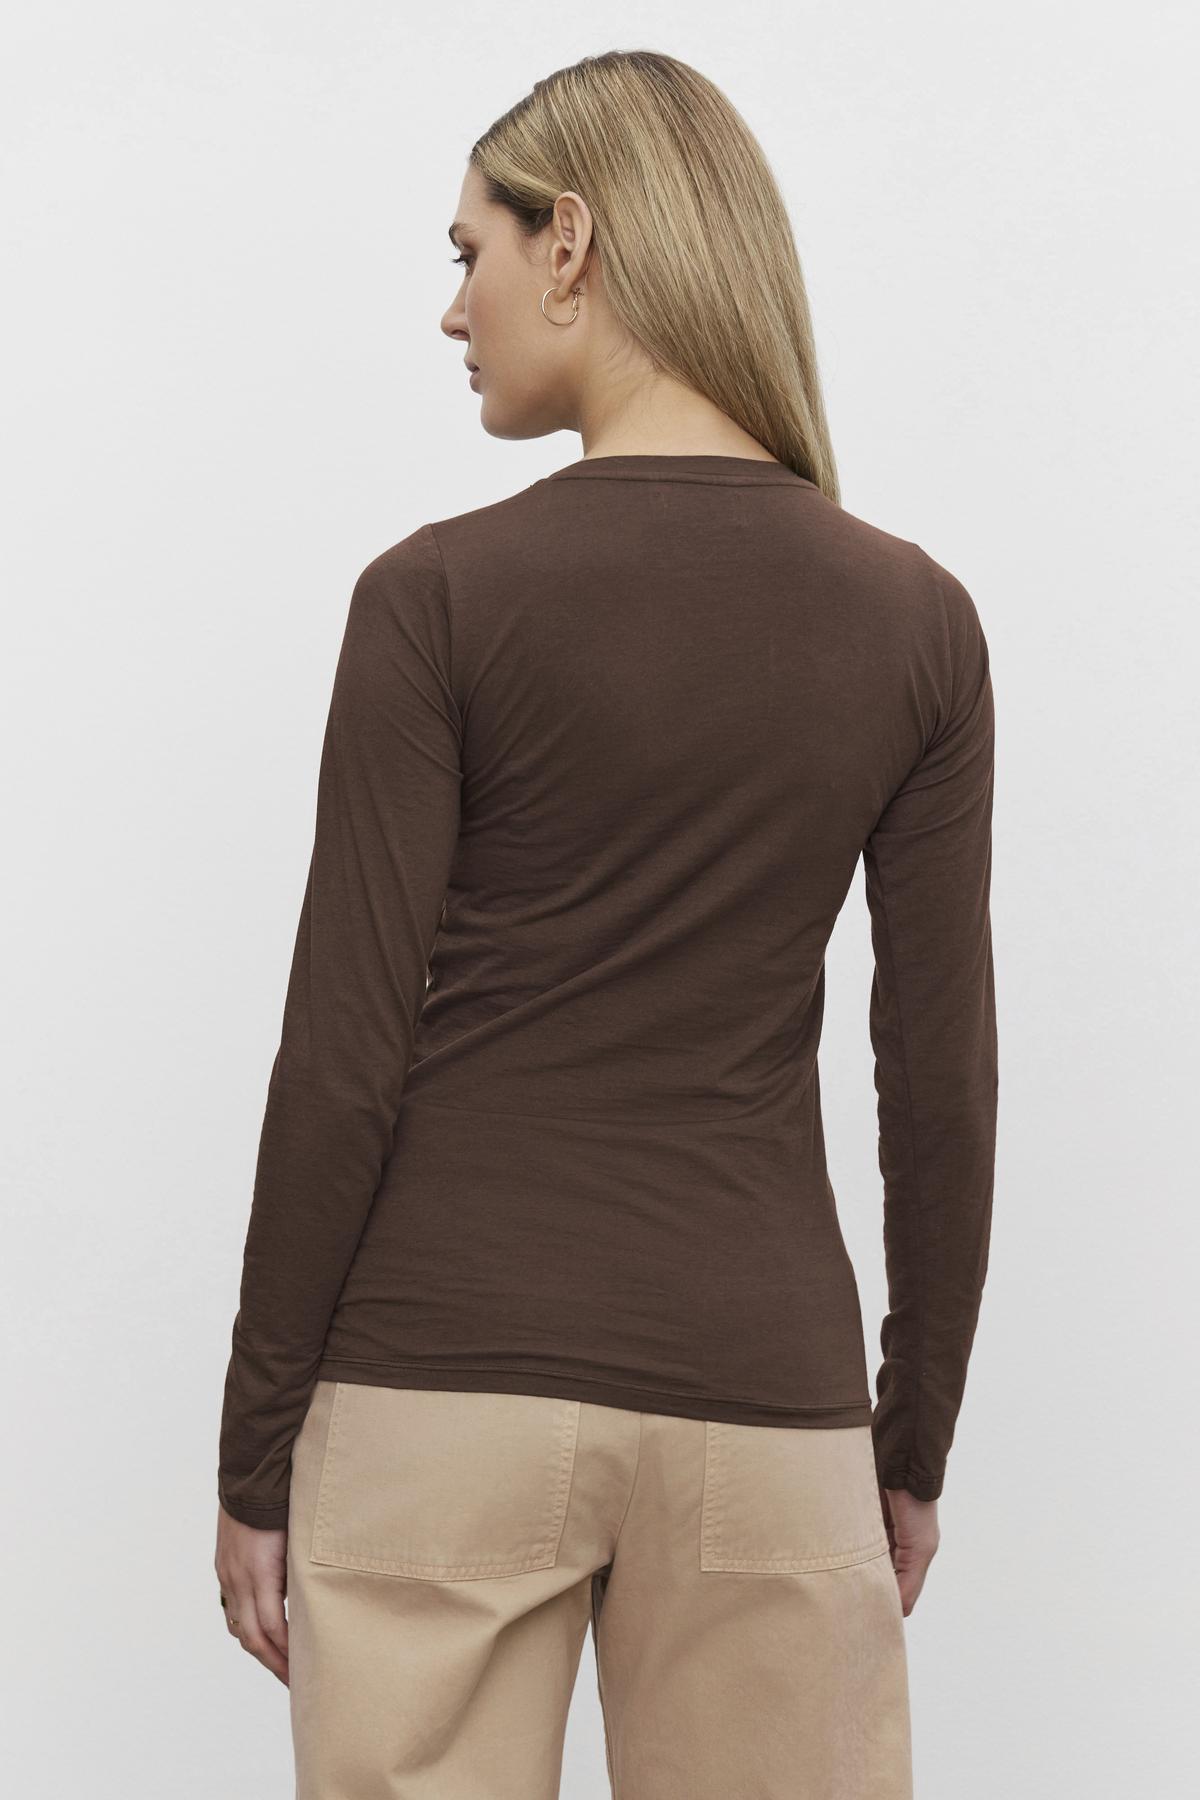   A person with long straight hair is standing and facing away, wearing an ultra-soft ZOFINA TEE by Velvet by Graham & Spencer in whisper brown along with beige pants. 